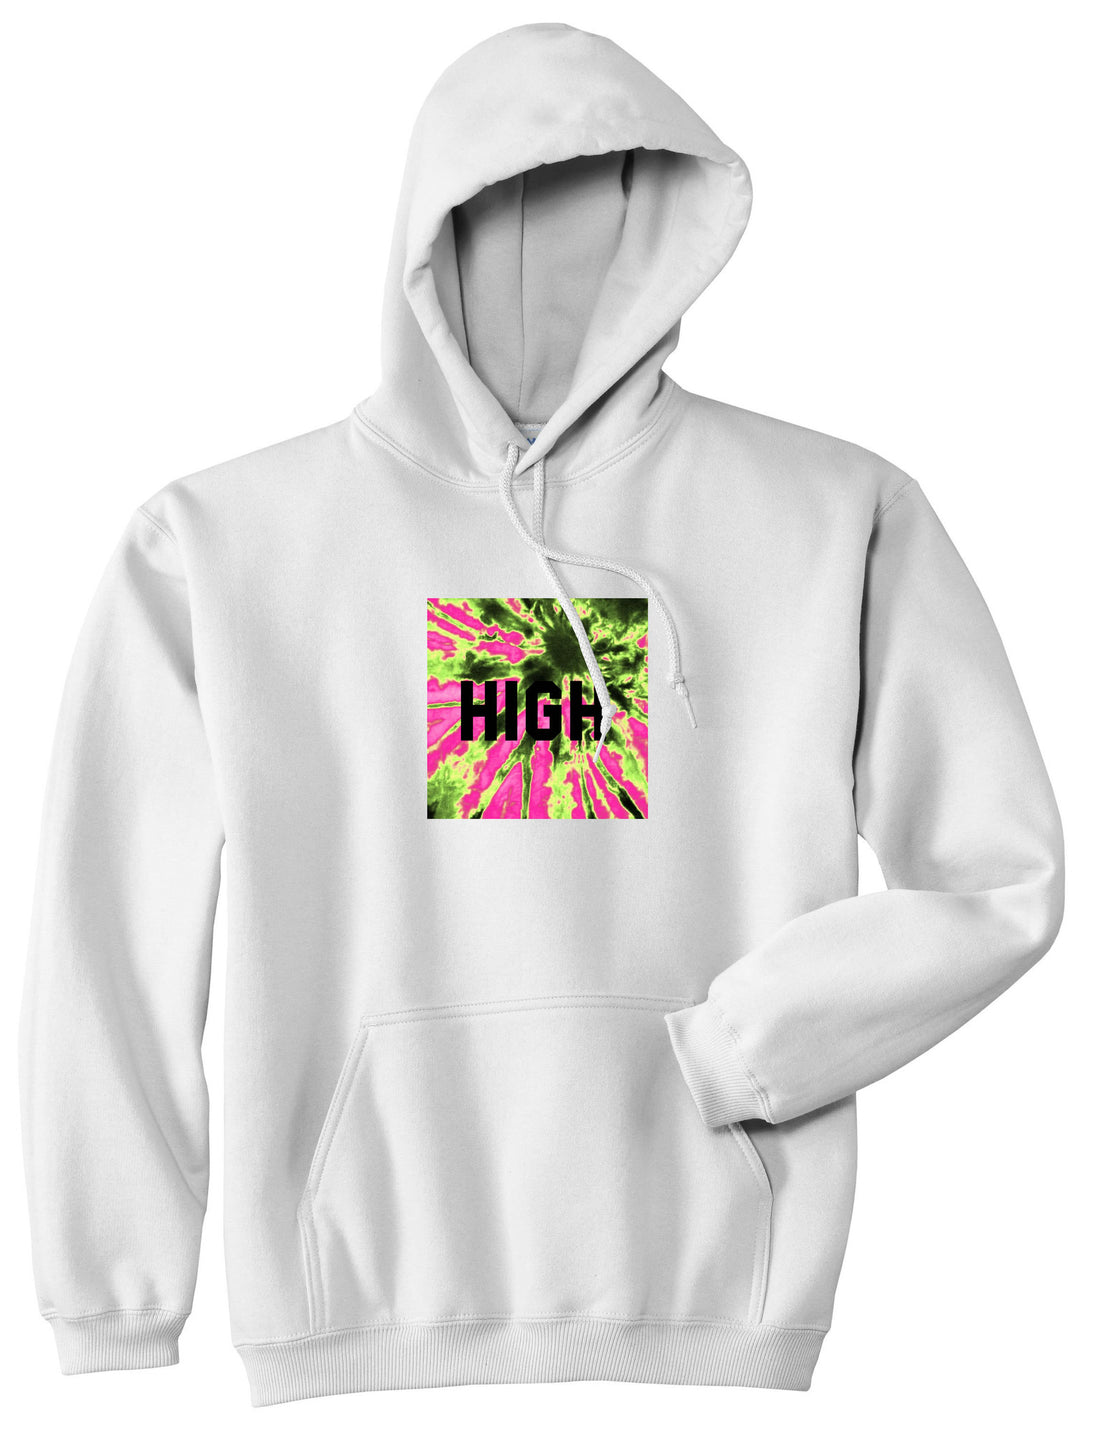 High Pink Tie Dye Pullover Hoodie in White By Kings Of NY